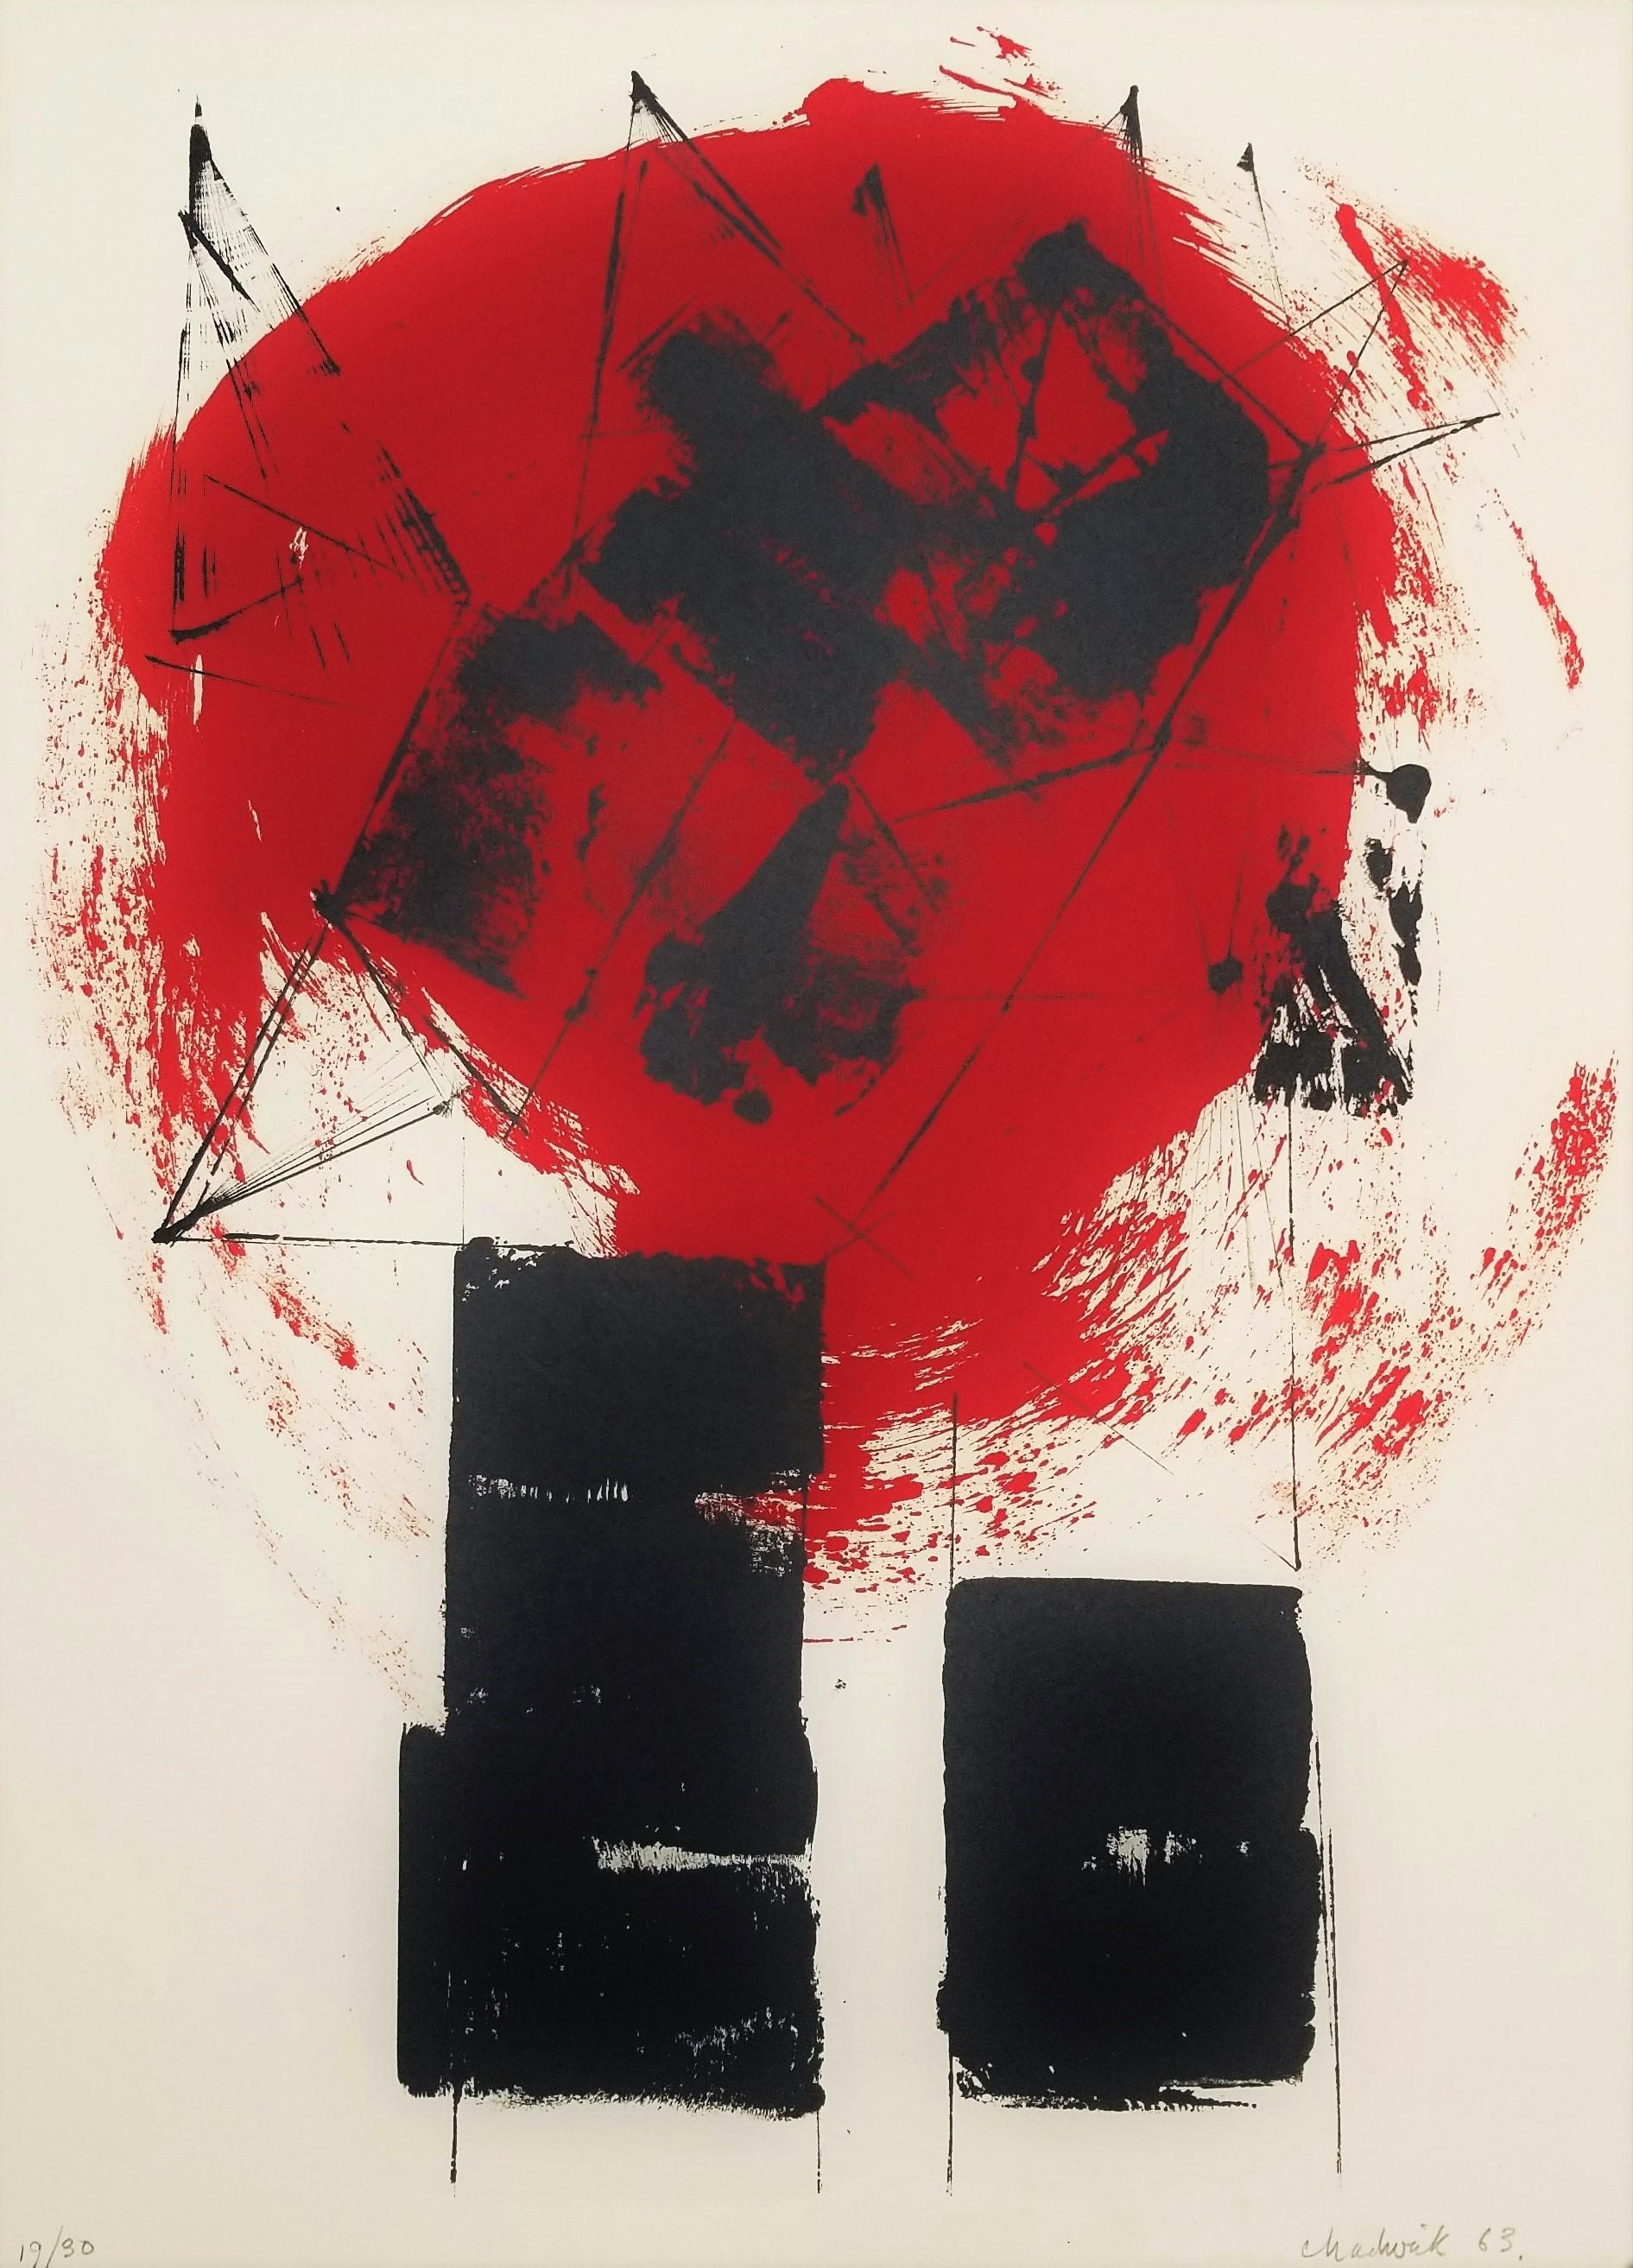 Artist: Lynn Chadwick (English, 1914-2003)
Title: "Red and Black II"
Series: Red and Black
*Signed and dated by Chadwick in pencil lower right
Year: 1963
Medium: Original Lithograph on J.B. Green Hayle Mill Crisbrook handmade paper
Limited edition: